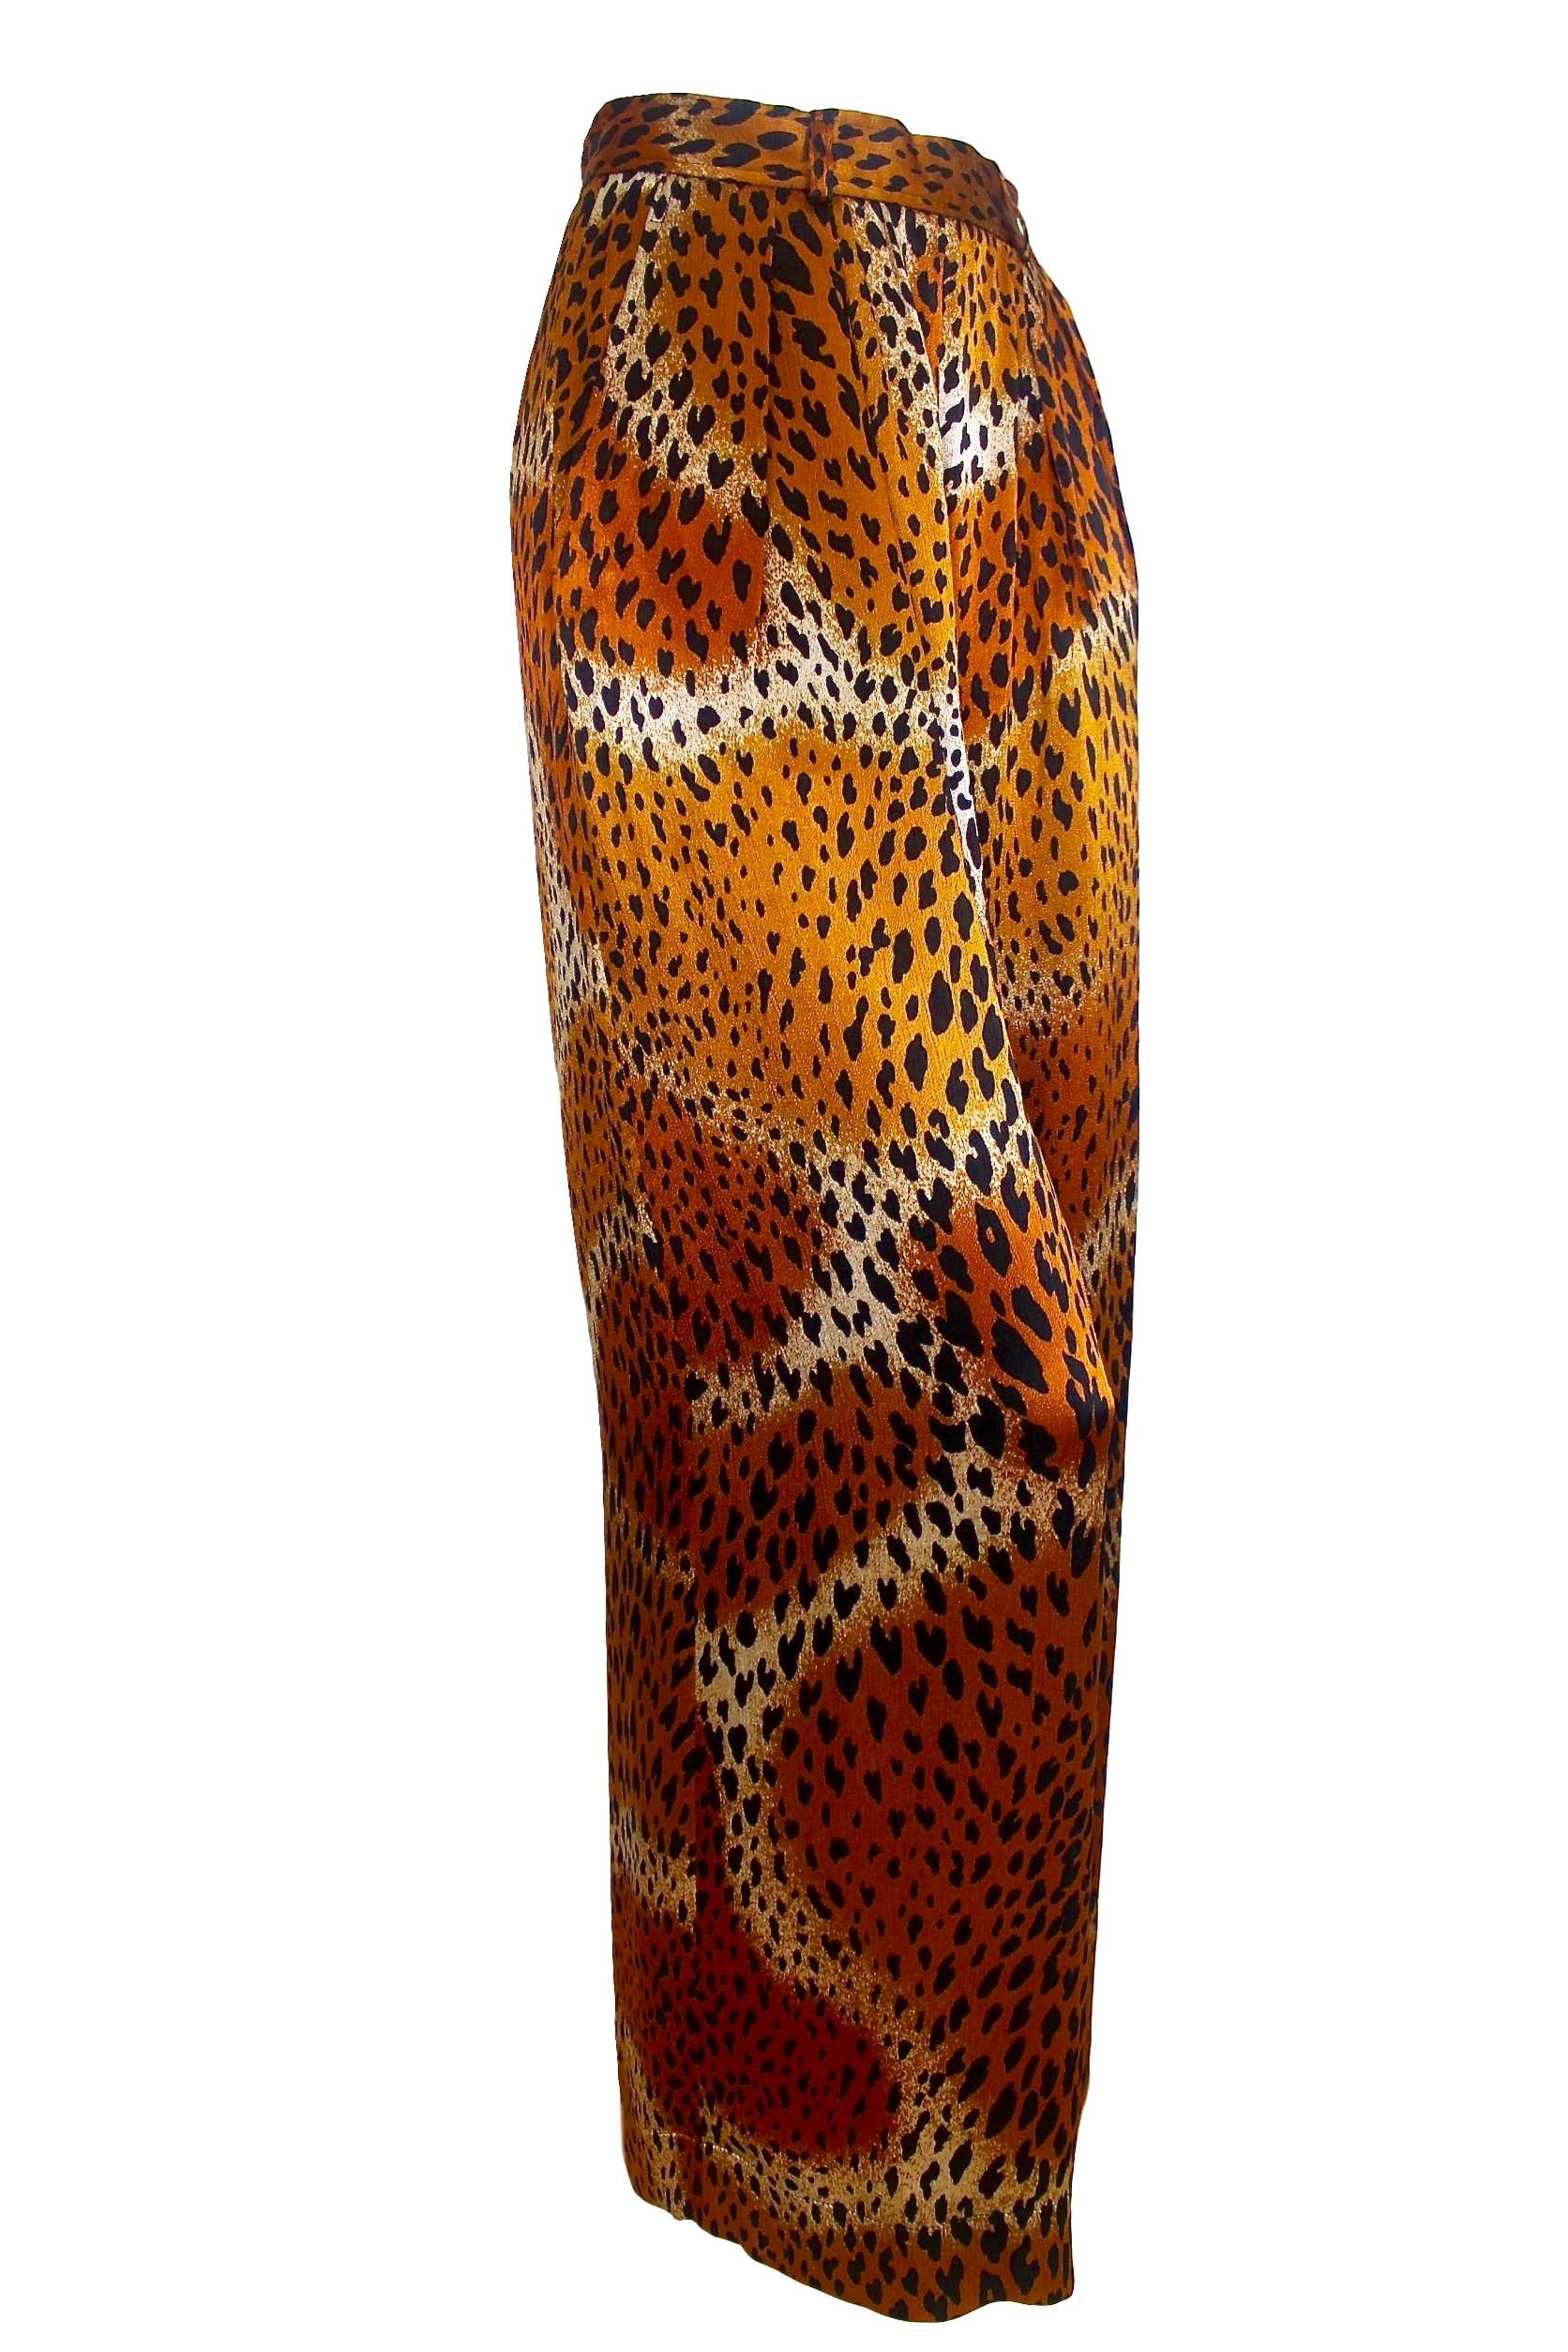 Yves Saint Laurent 1977 Leopard Print Camisole and Trousers For Sale 2